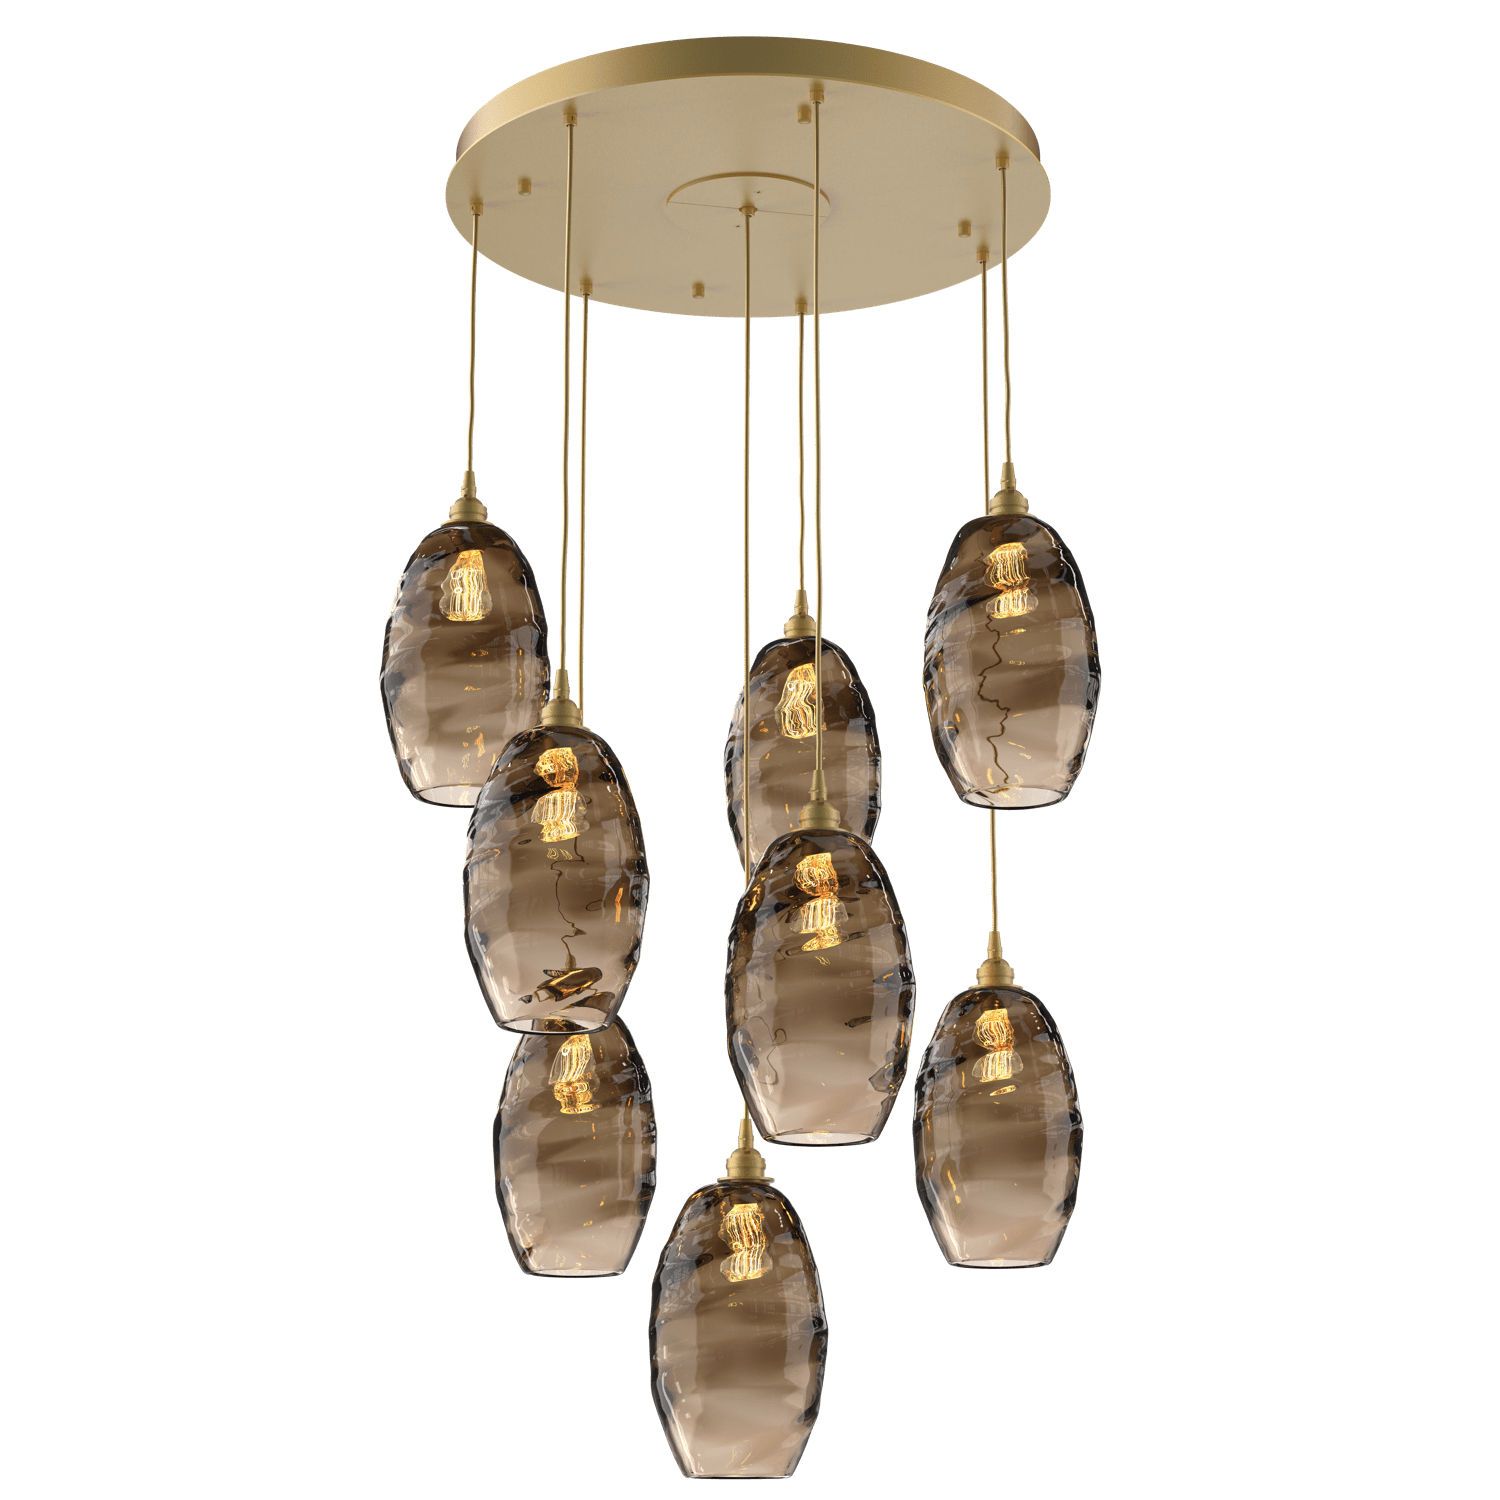 CHB0035-08-GB-OB-Hammerton-Studio-Optic-Blown-Glass-Elisse-8-light-round-pendant-chandelier-with-gilded-brass-finish-and-optic-bronze-blown-glass-shades-and-incandescent-lamping